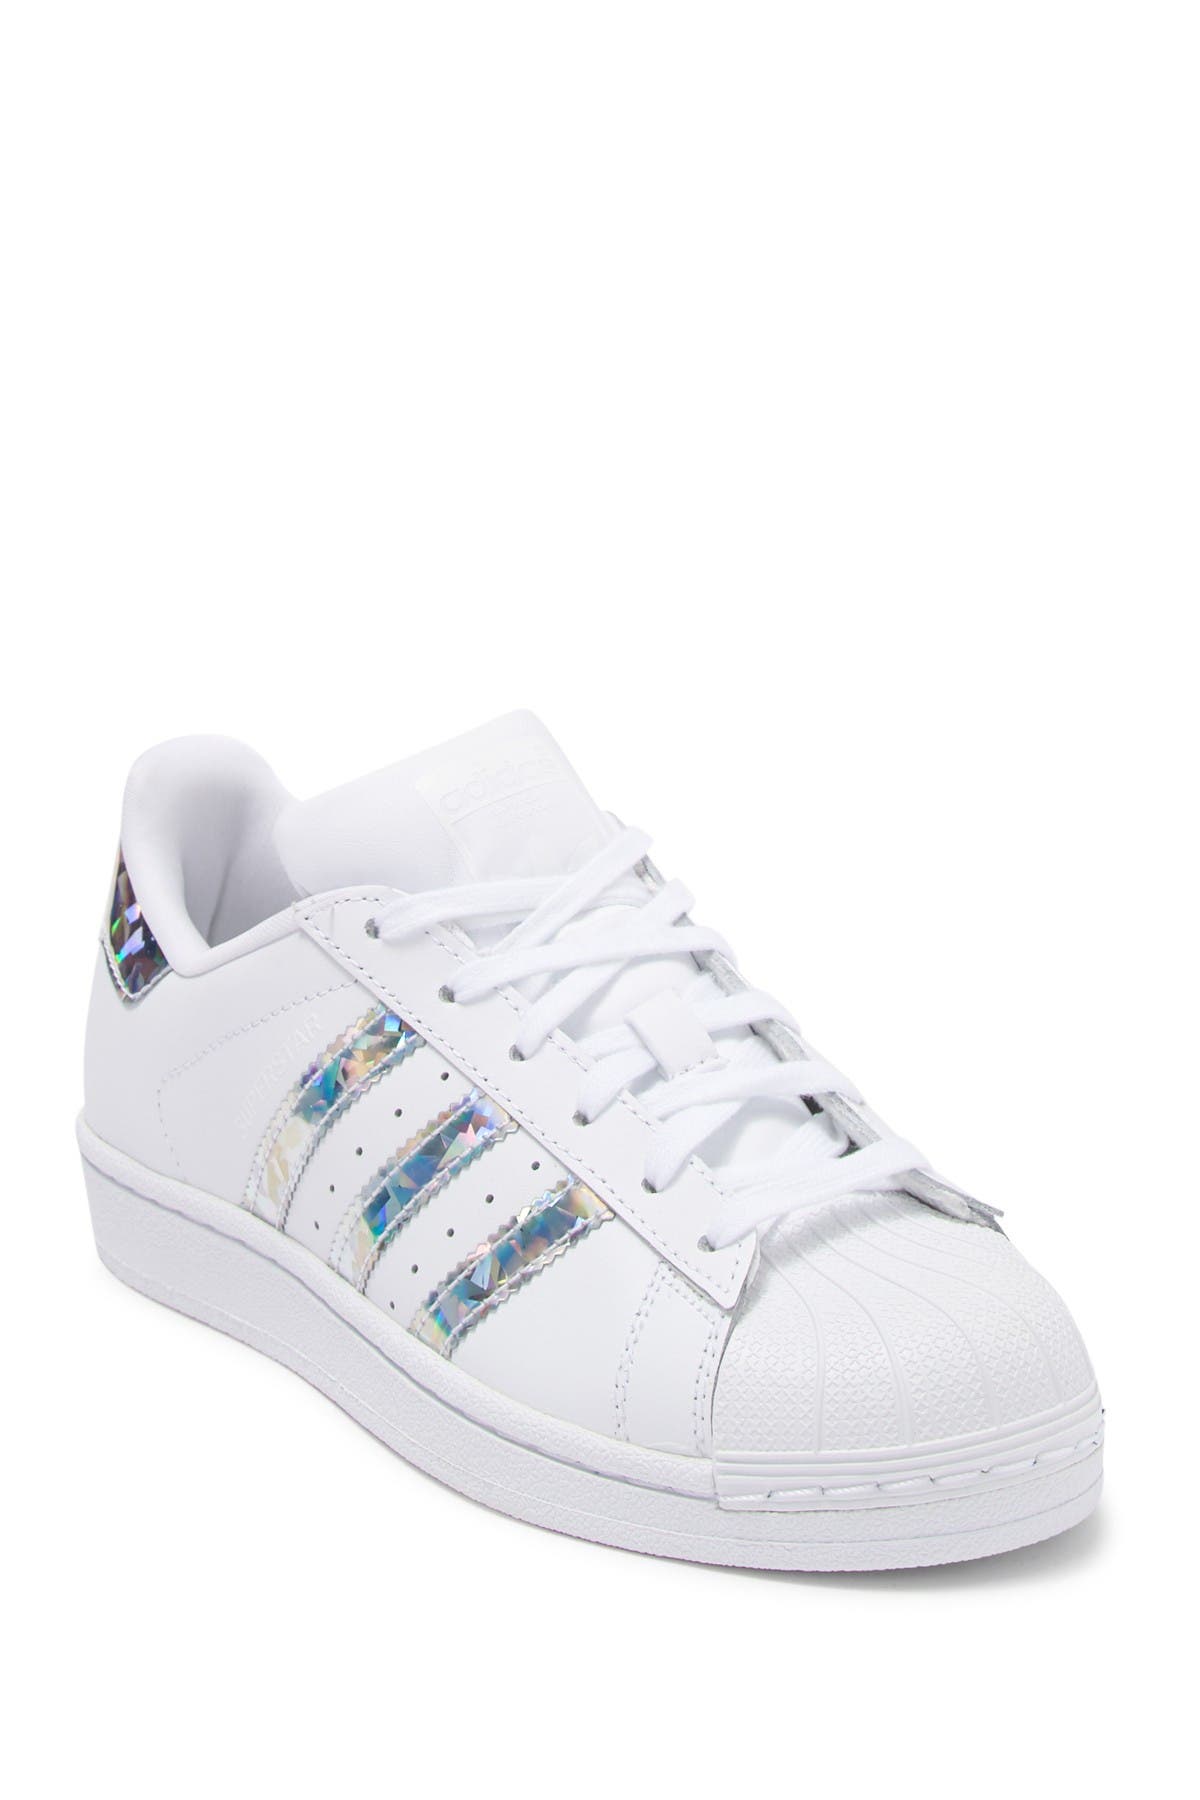 adidas | Superstar Leather Sneaker 